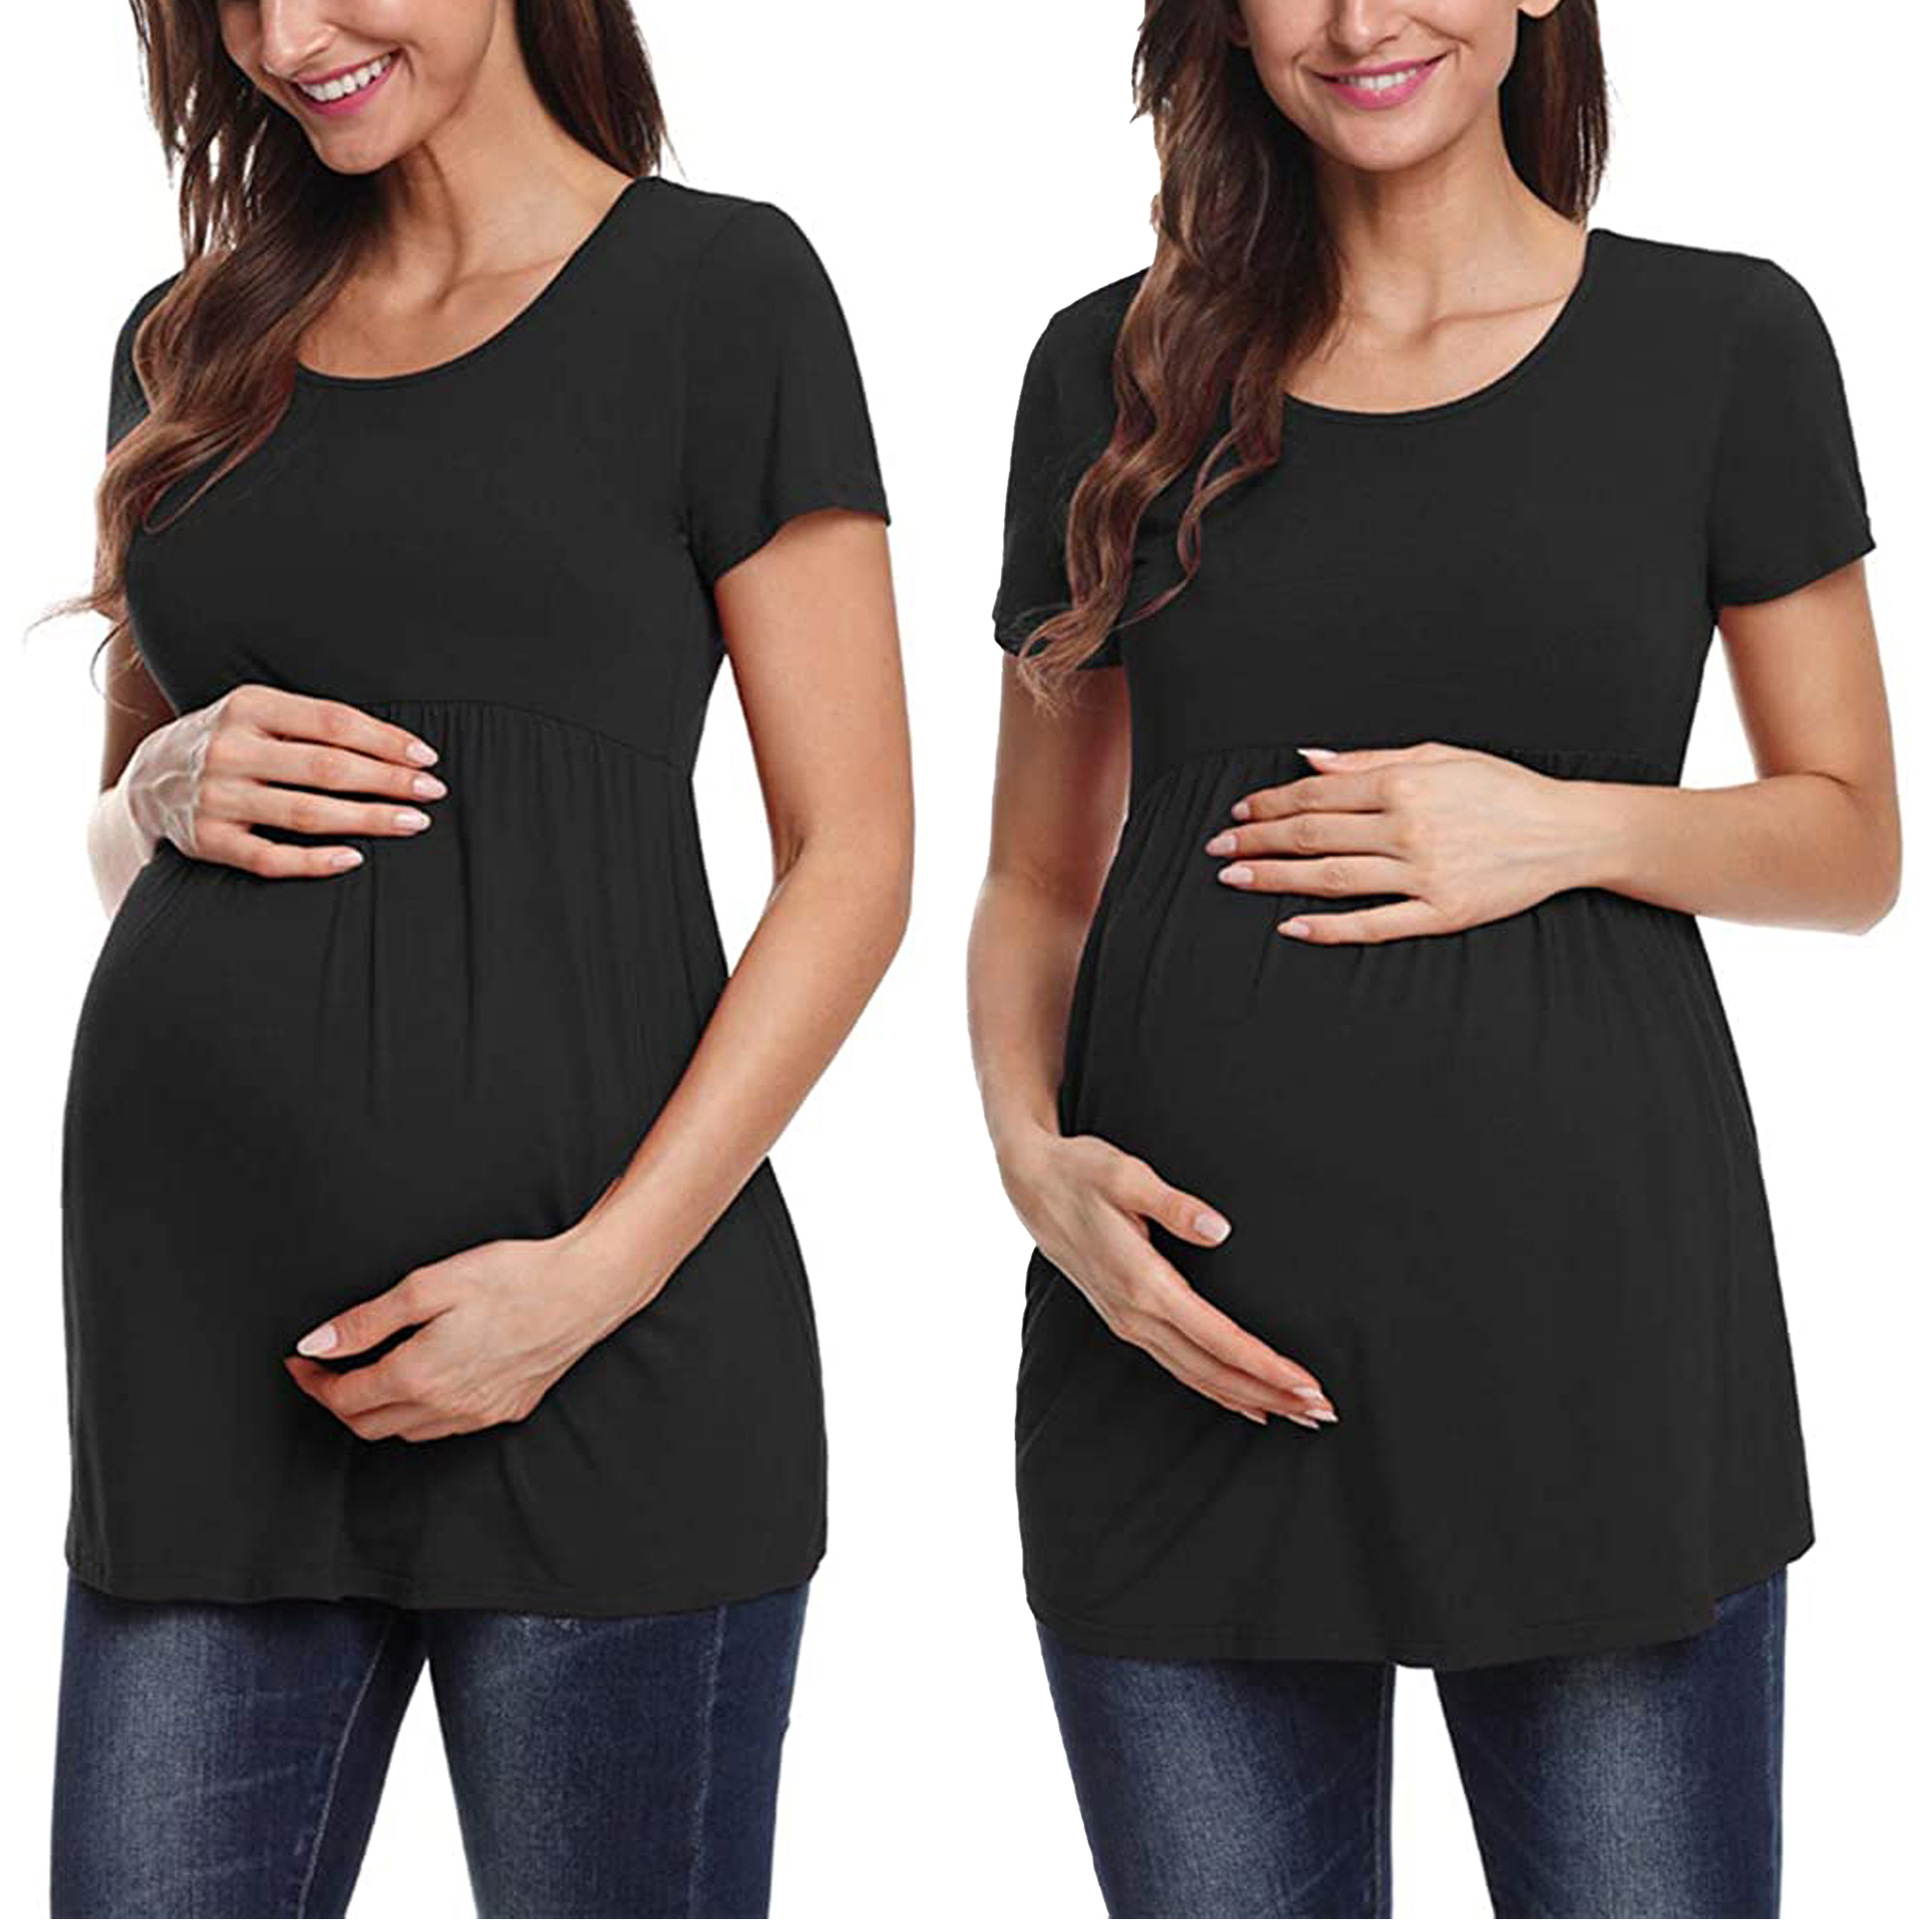 Totes Preggers Maternity T-Shirt - maternity cut shirt with ruched sid –  Twinkle Twinkle Tees